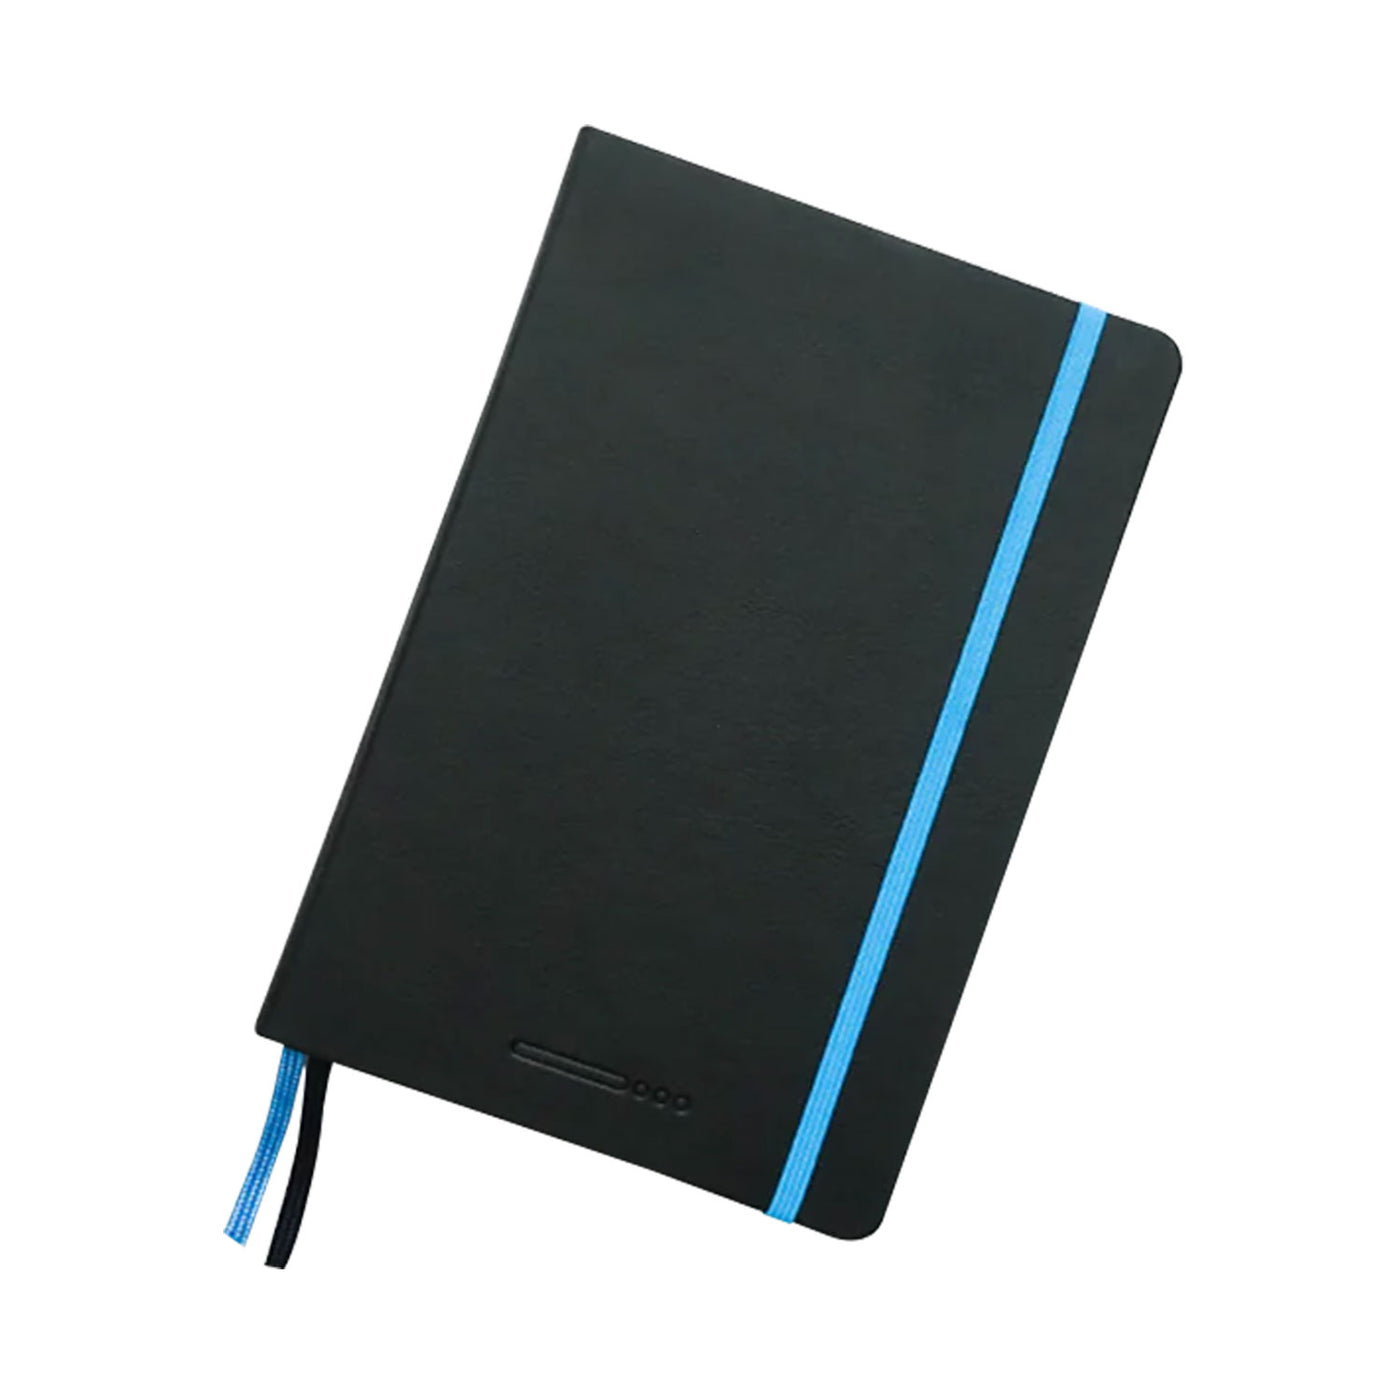 Endless Recorder Infinite Space Black Regalia Notebook - A5, Dotted